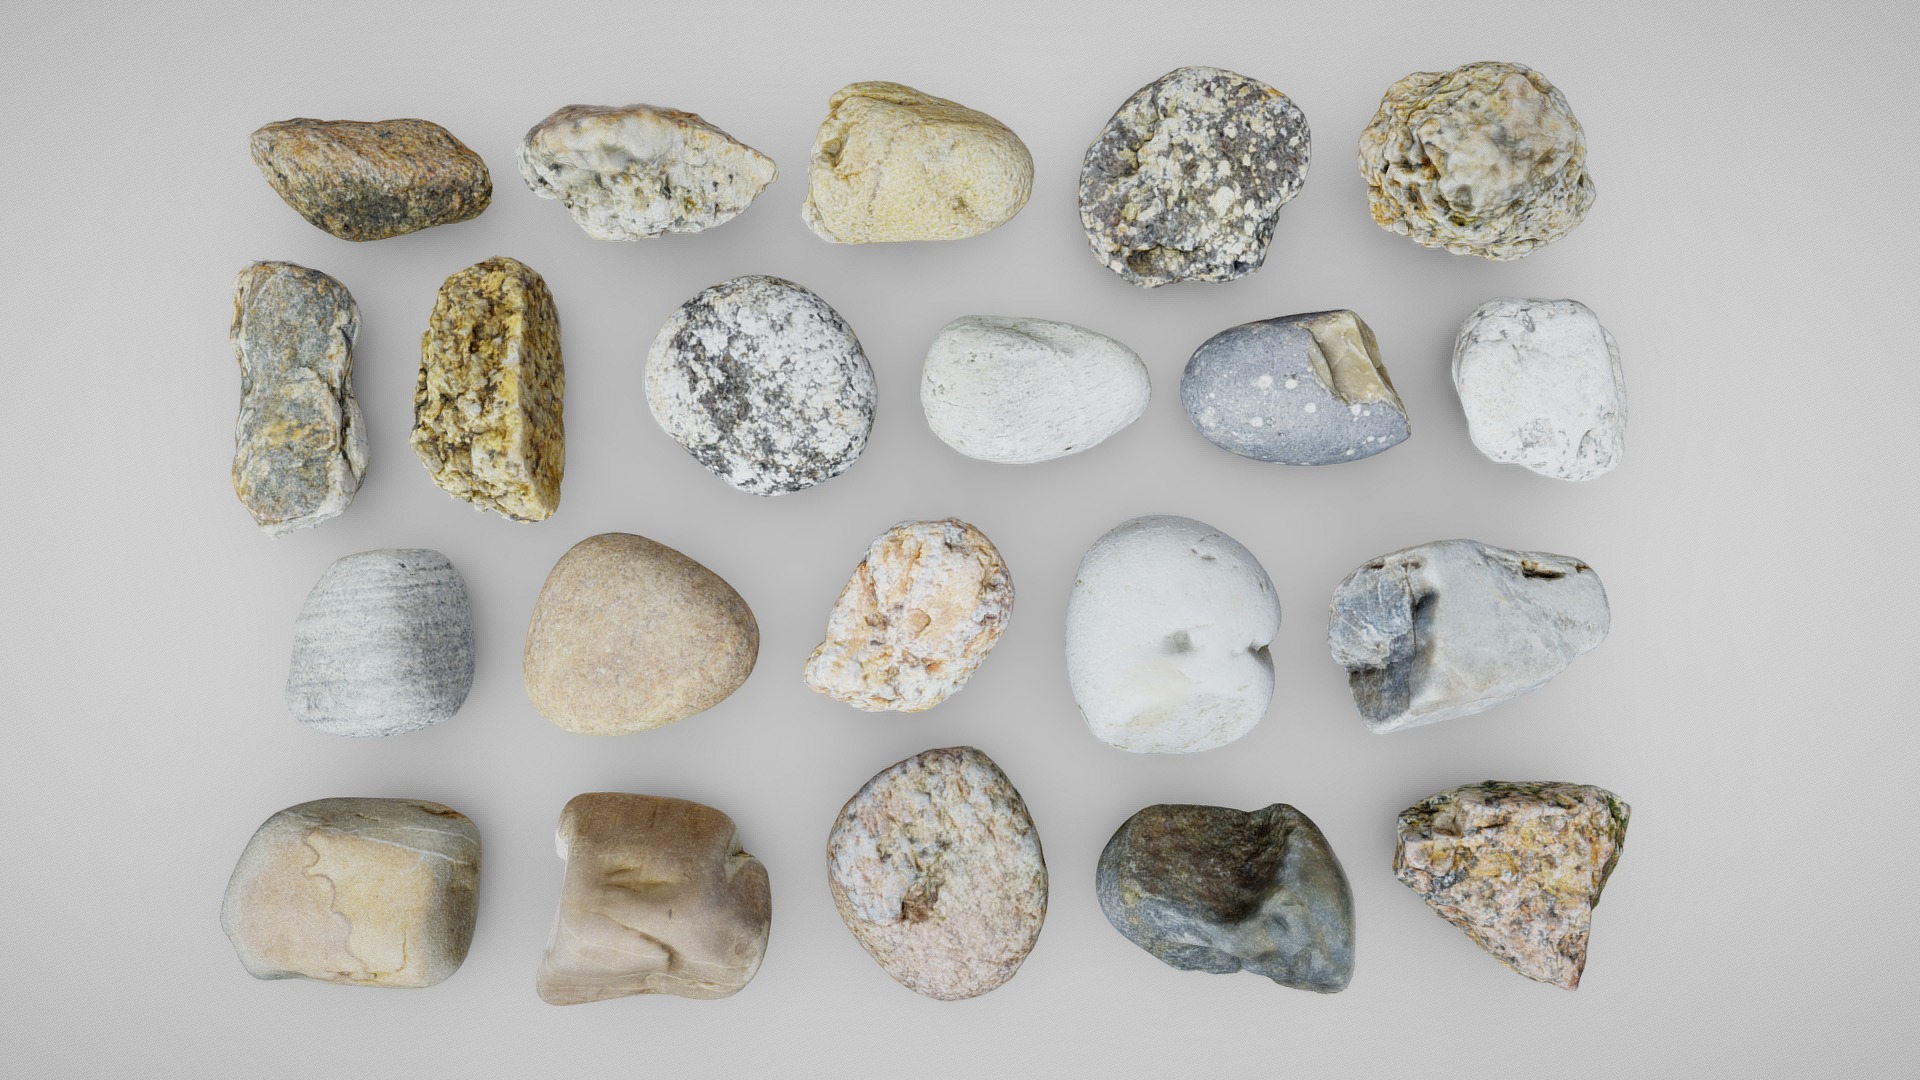 Other packs: pack 1, pack 3, pack 4

These assets were generated from scans of beach pebbles and stones I picked up on the shore between Plouguerneau and Roscoff, in France. I did not specifically select extraordinary samples, but rather tried to go for a broad diversity of colors and shapes in order to create an interesting pack.

Each prop in this bundle comes with .fbx, .obj and .dae formats, and is available in 5 different resolutions:




LOD0: 15k tris - 4096x4096 textures (albedo and normal maps)

LOD1: 5k tris - 2048x2048 (those are the ones visible here!)

LOD2: 1.5k tris - 1024x1024

LOD3: 500 tris - 512x512

LOD4: 150 tris - 256x256

If this fits your usage, you can also simply download the full collection of 84 rocks for free in the lowest resolution here :D

Enjoy ! - Rocks - Pack 2 - Buy Royalty Free 3D model by Loïc Norgeot (@norgeotloic) 3d model